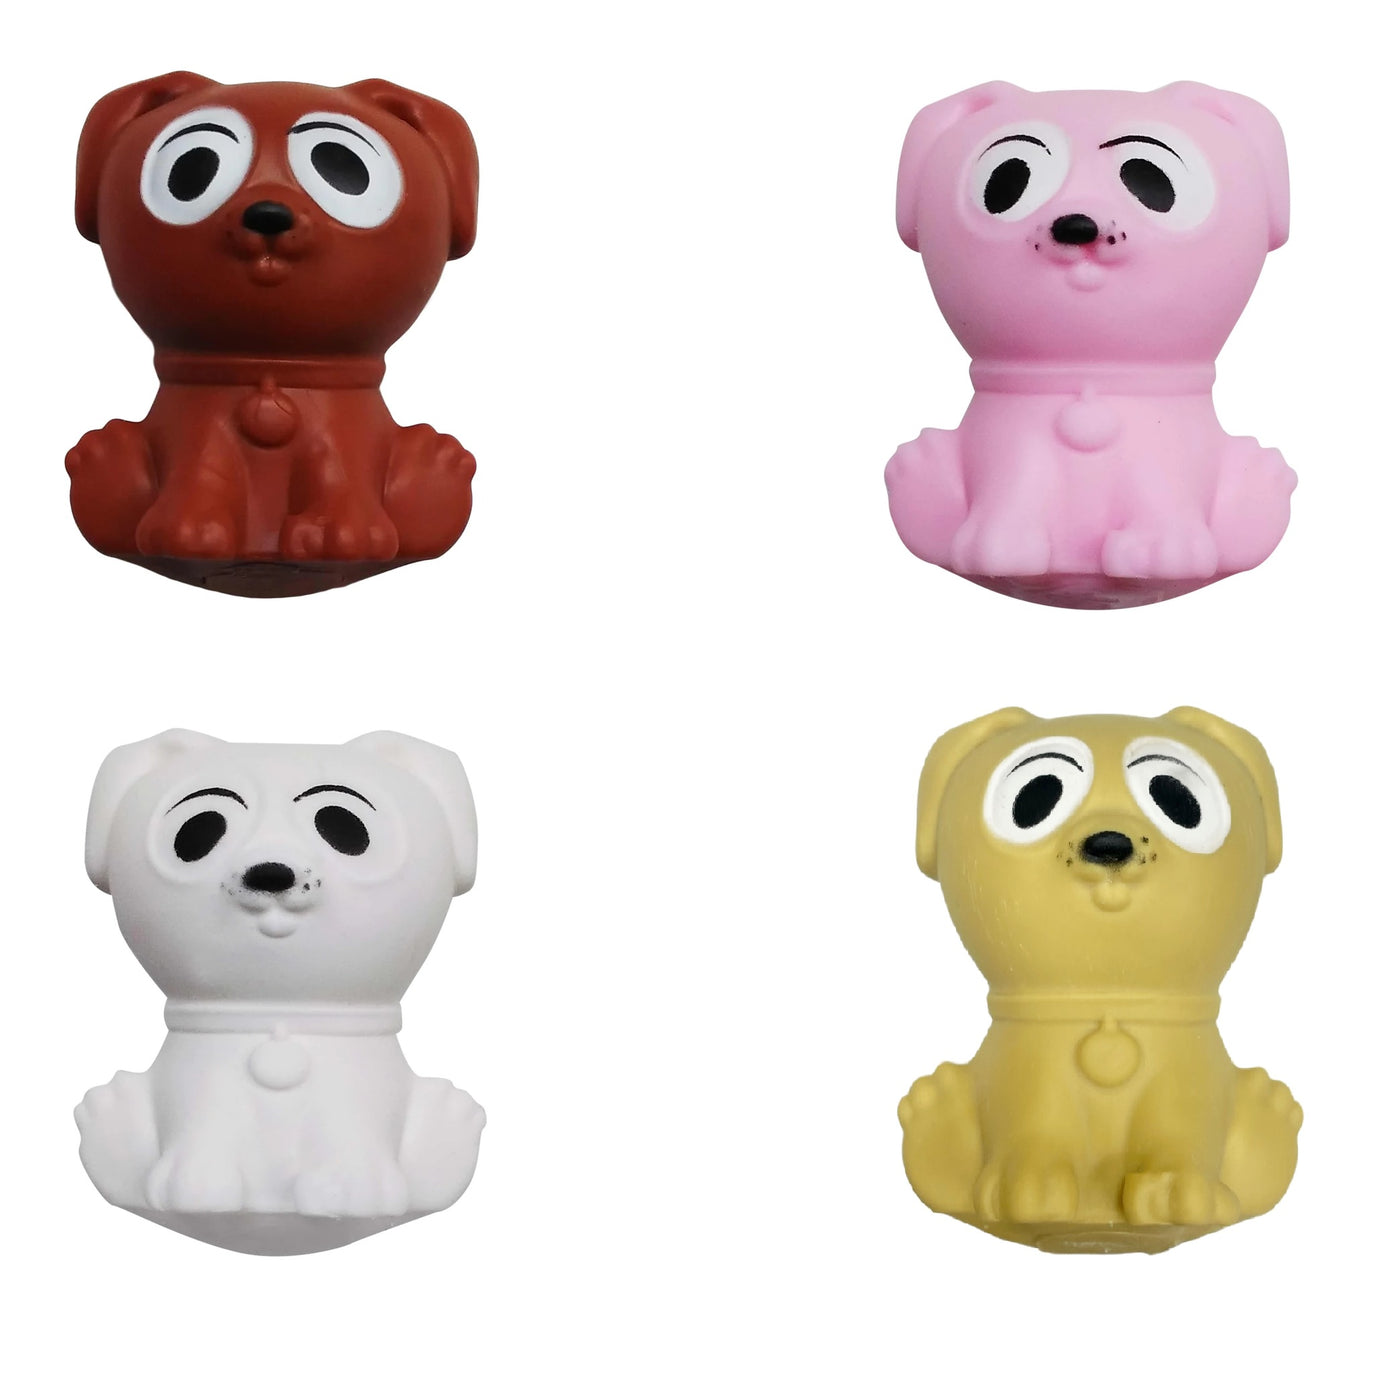 4-Pack Squishy Squeeze Toy